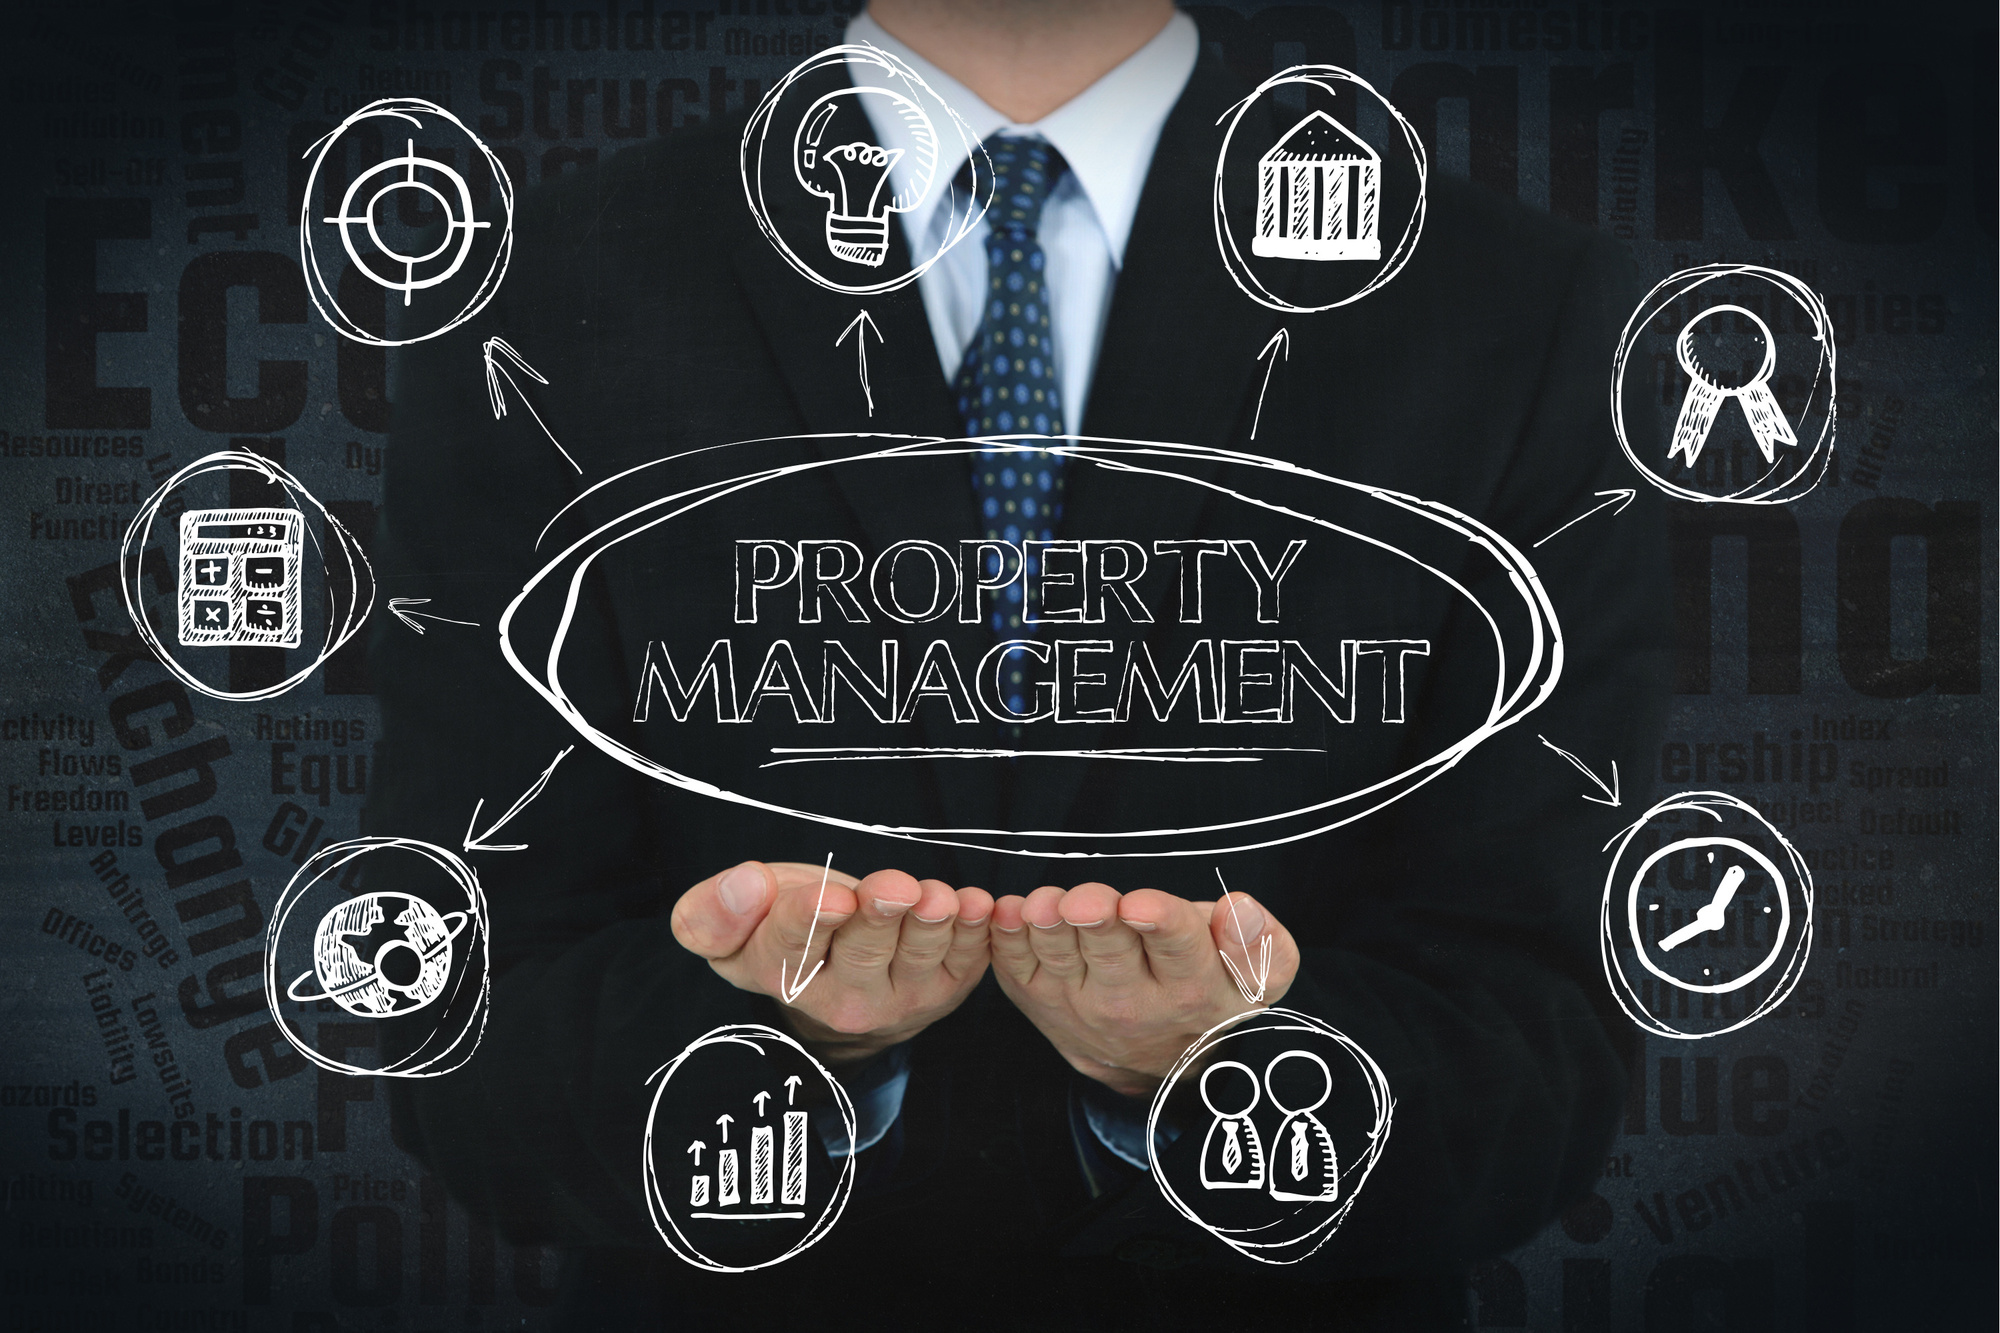 What to Look for When Hiring a Property Management Company